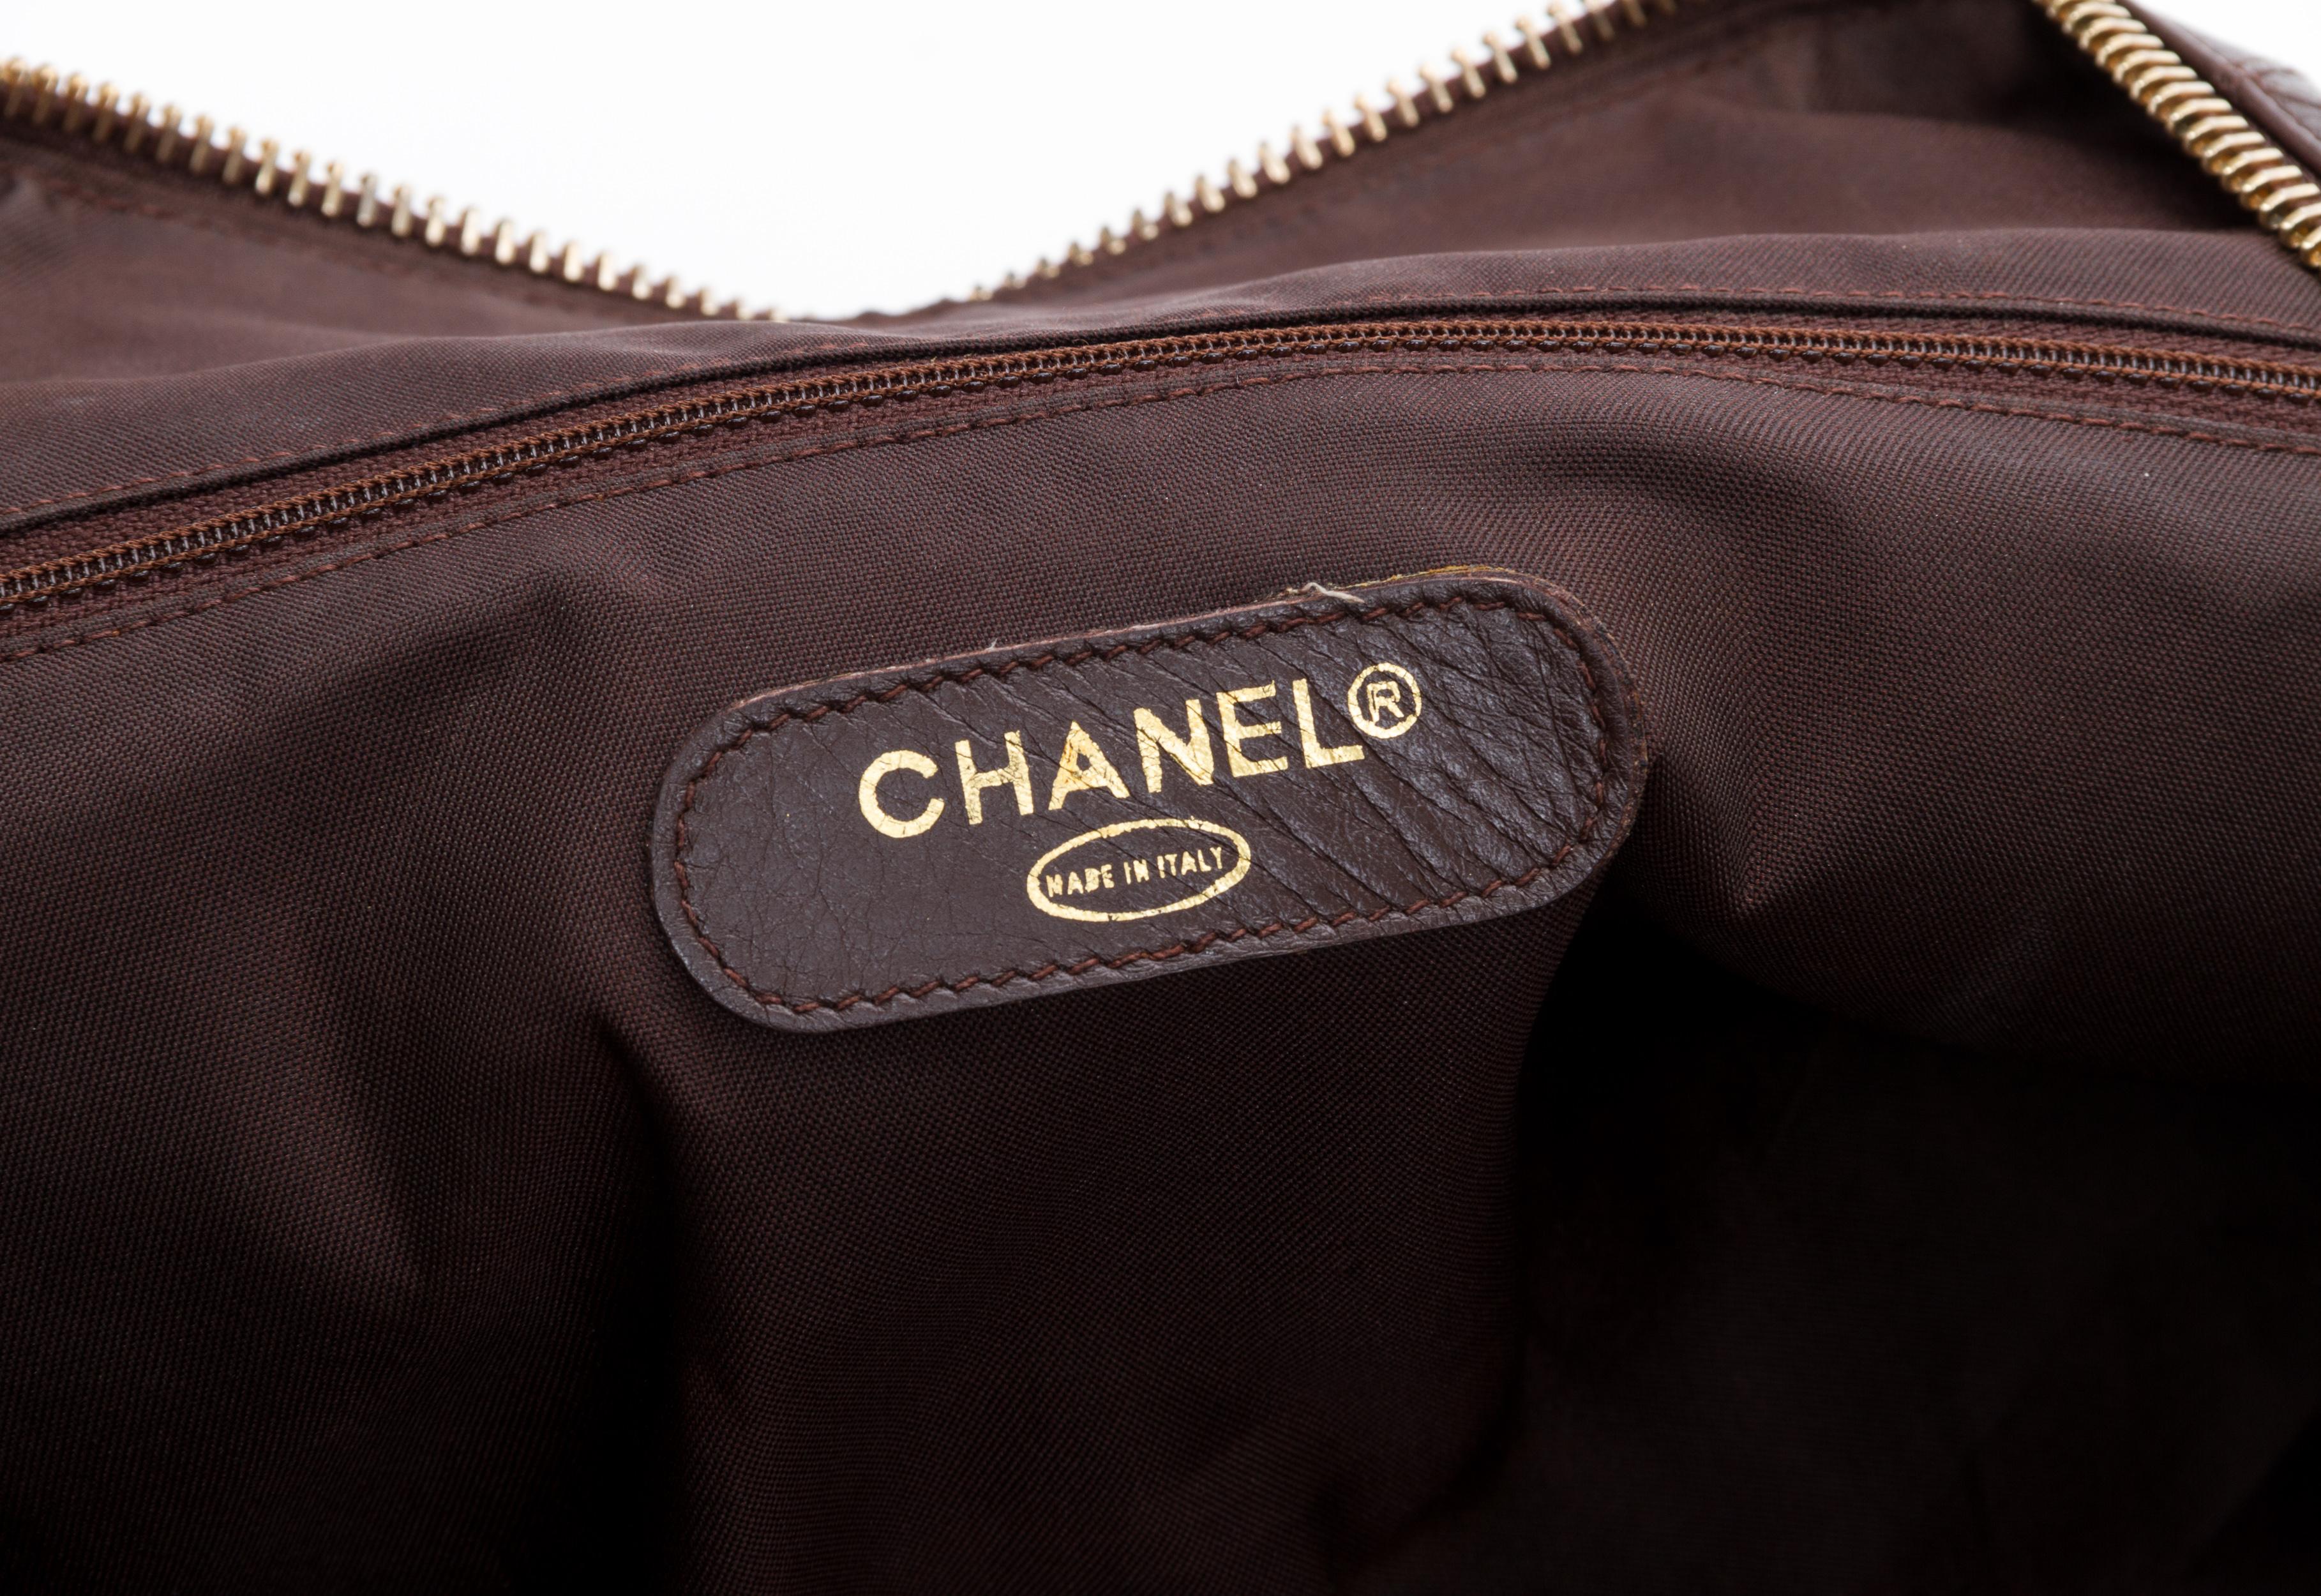 Chanel Vintage Brown Diamond Quilted Duffle Bag, 1980s  In Excellent Condition For Sale In West Hollywood, CA